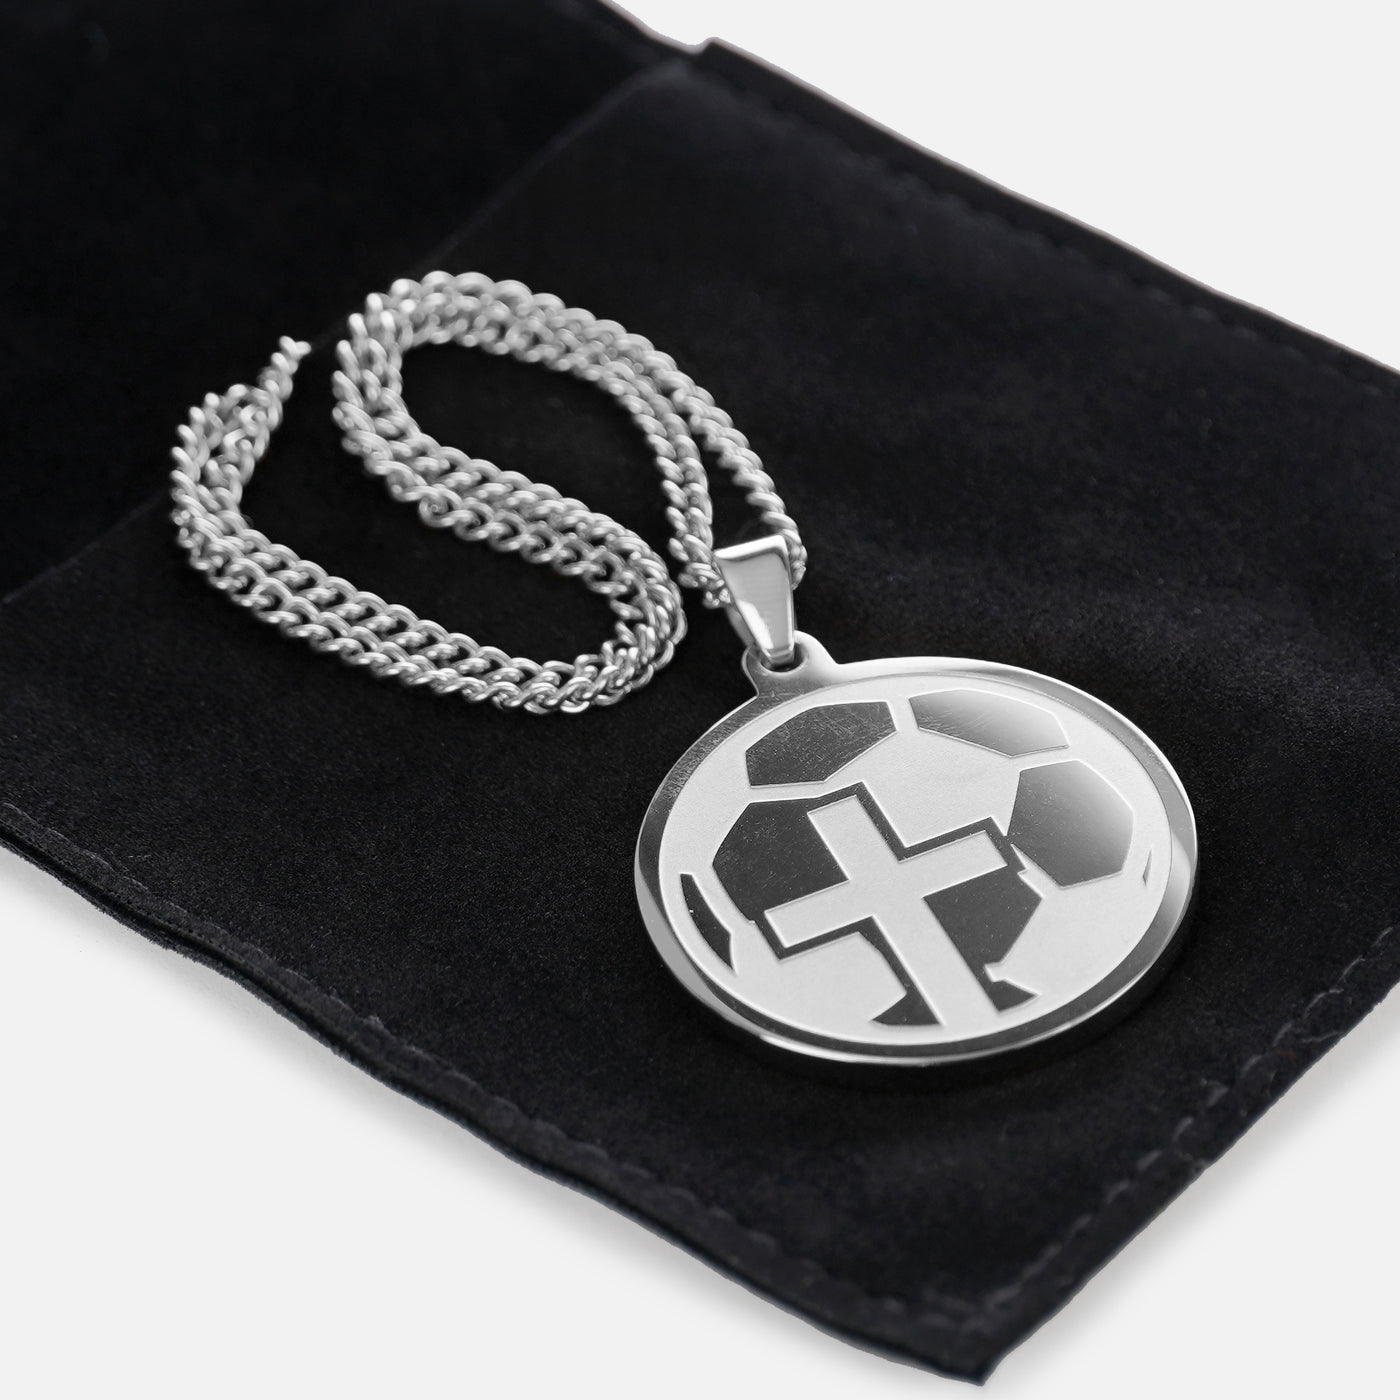 Soccer Faith Cross Pendant with Chain Necklace - Stainless Steel